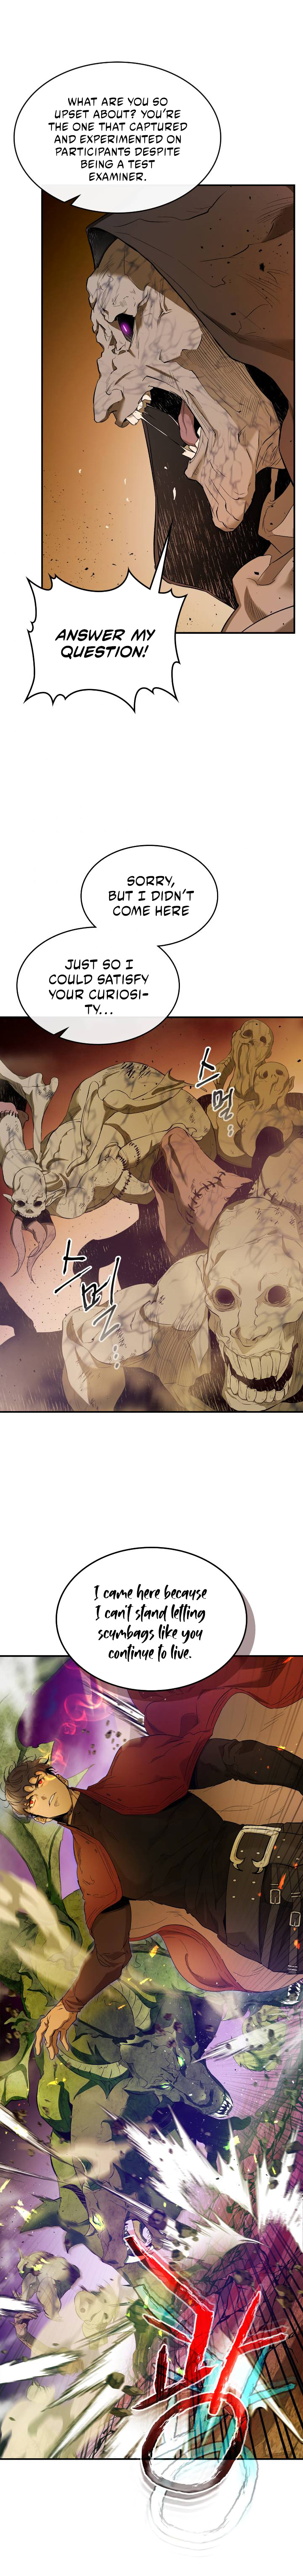 Leveling With The Gods Chapter 21, Leveling With The Gods 21, Read Leveling With The Gods Chapter 21, Leveling With The Gods Chapter 21 Manga, Leveling With The Gods Chapter 21 english, Leveling With The Gods Chapter 21 raw manga, Leveling With The Gods Chapter 21 online, Leveling With The Gods Chapter 21 high quality, Leveling With The Gods 21 chapter, Leveling With The Gods Chapter 21 manga scan